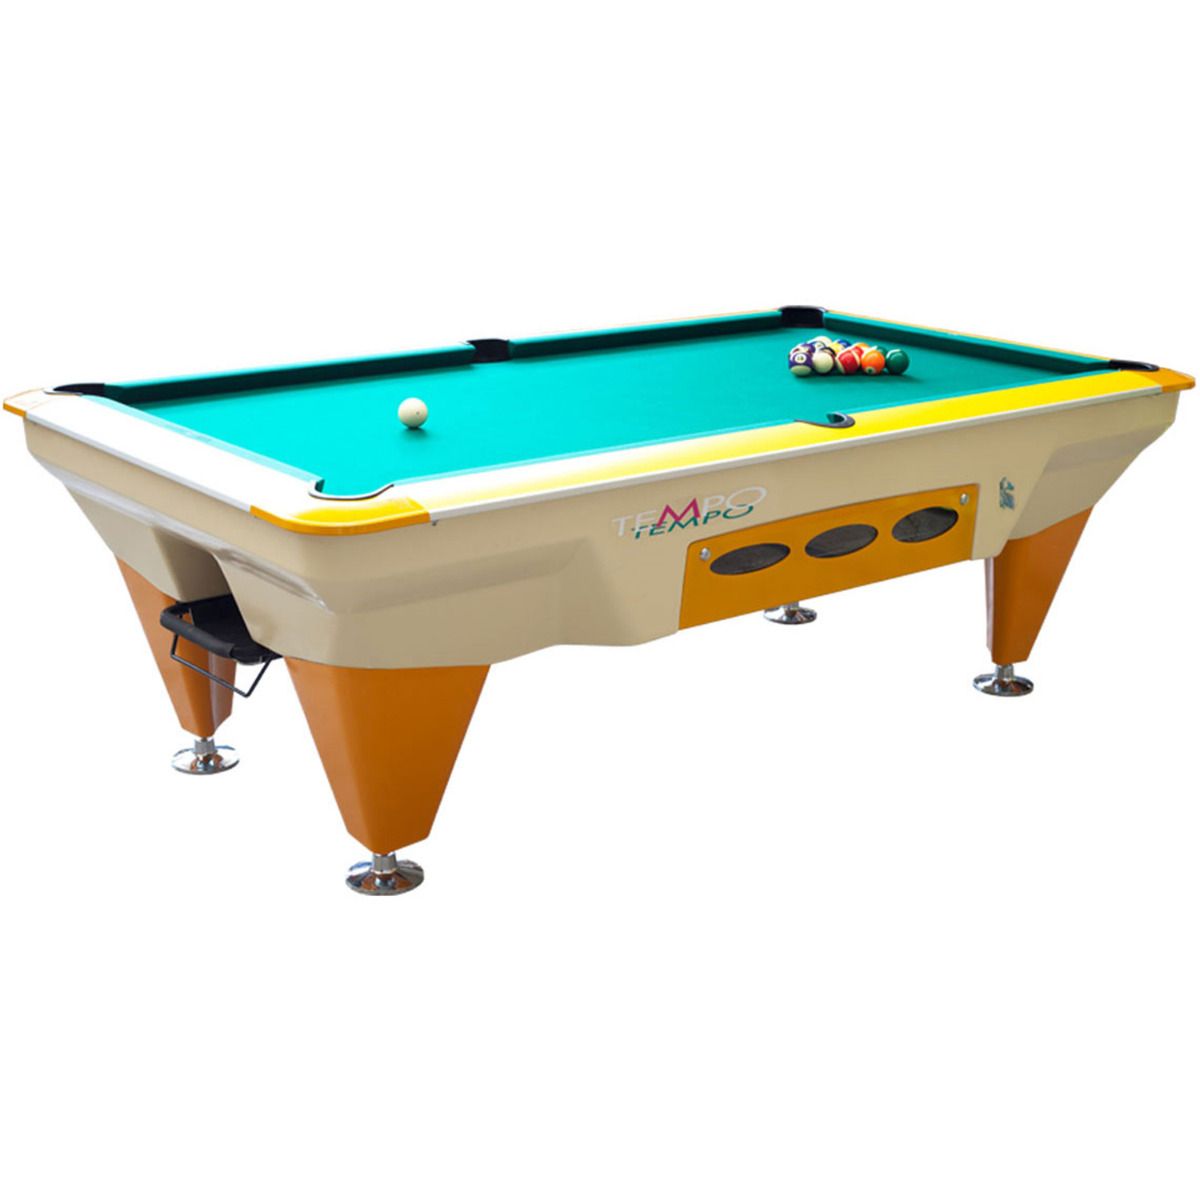 SAM Tempo outdoor pool 7ft 